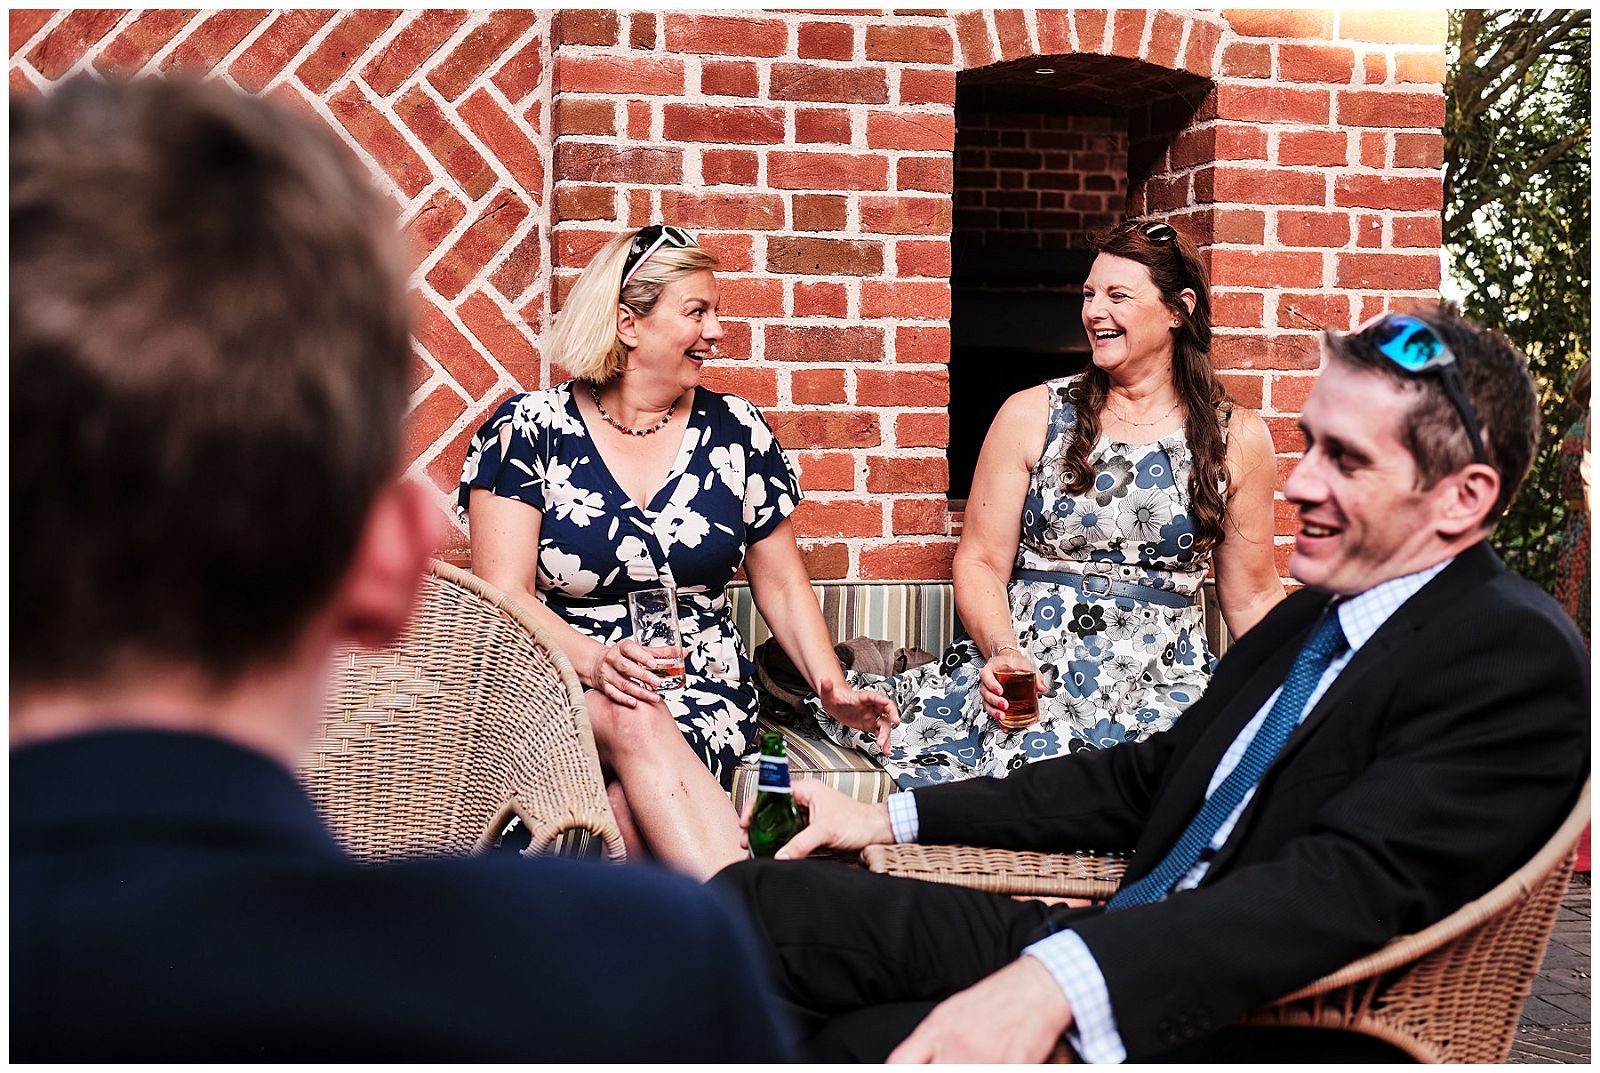 Reportage photographs capturing guests greeting each other for the wedding reception at Goldstone Hall in Shropshire by Documentary Wedding Photographer Stuart James